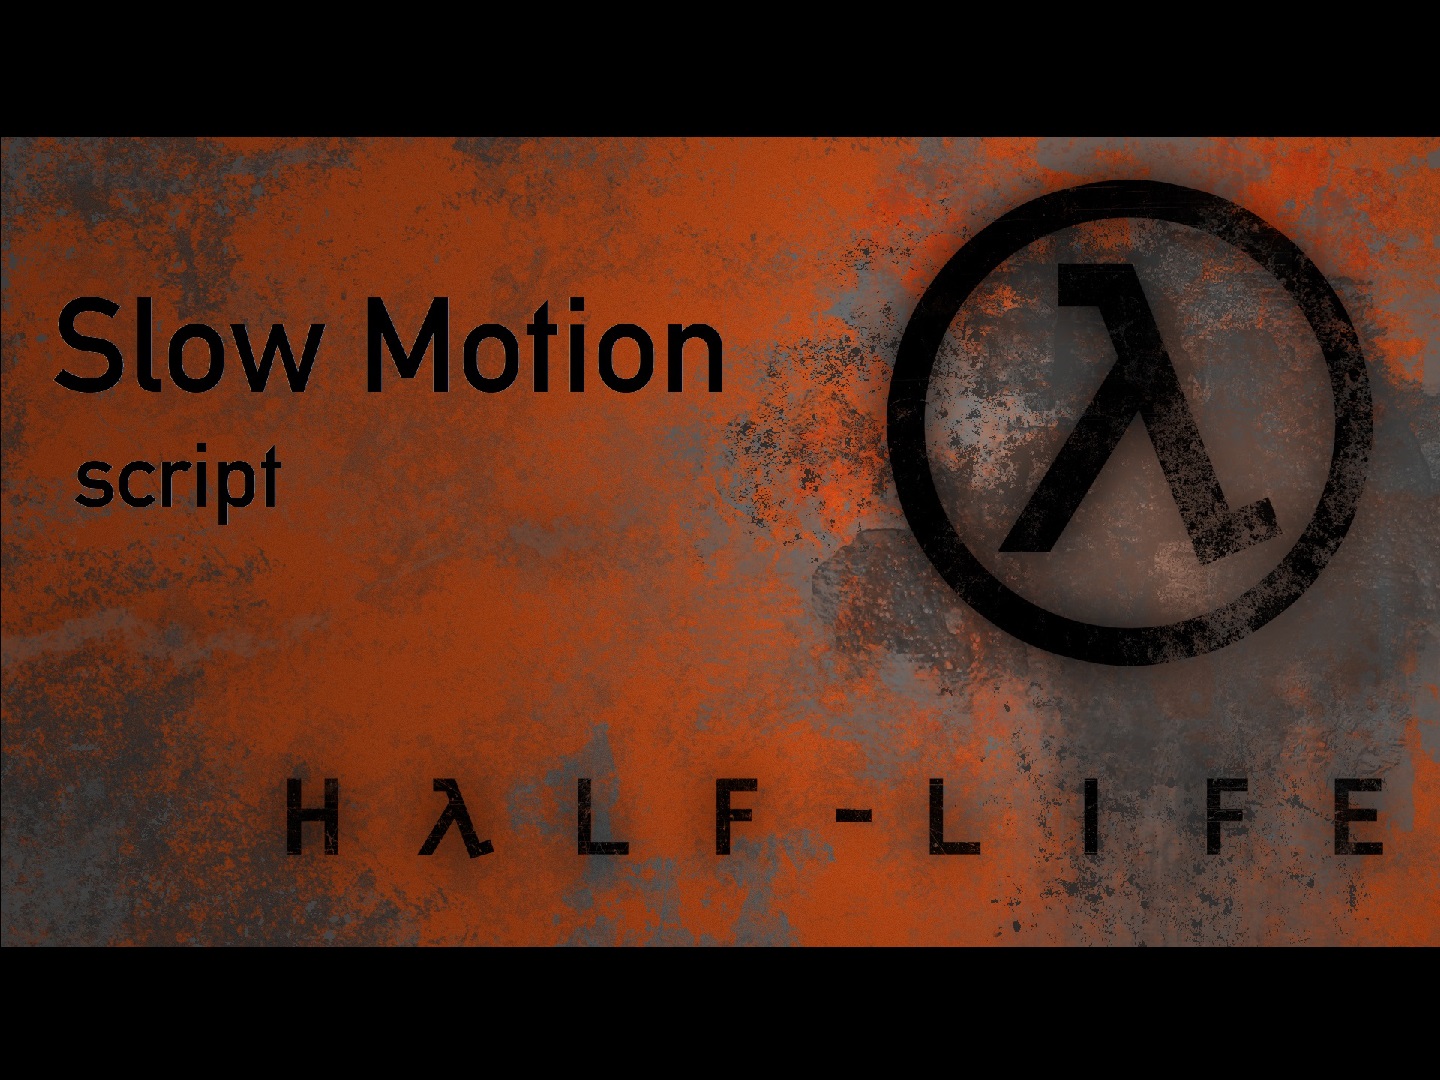 slow motion video fx download